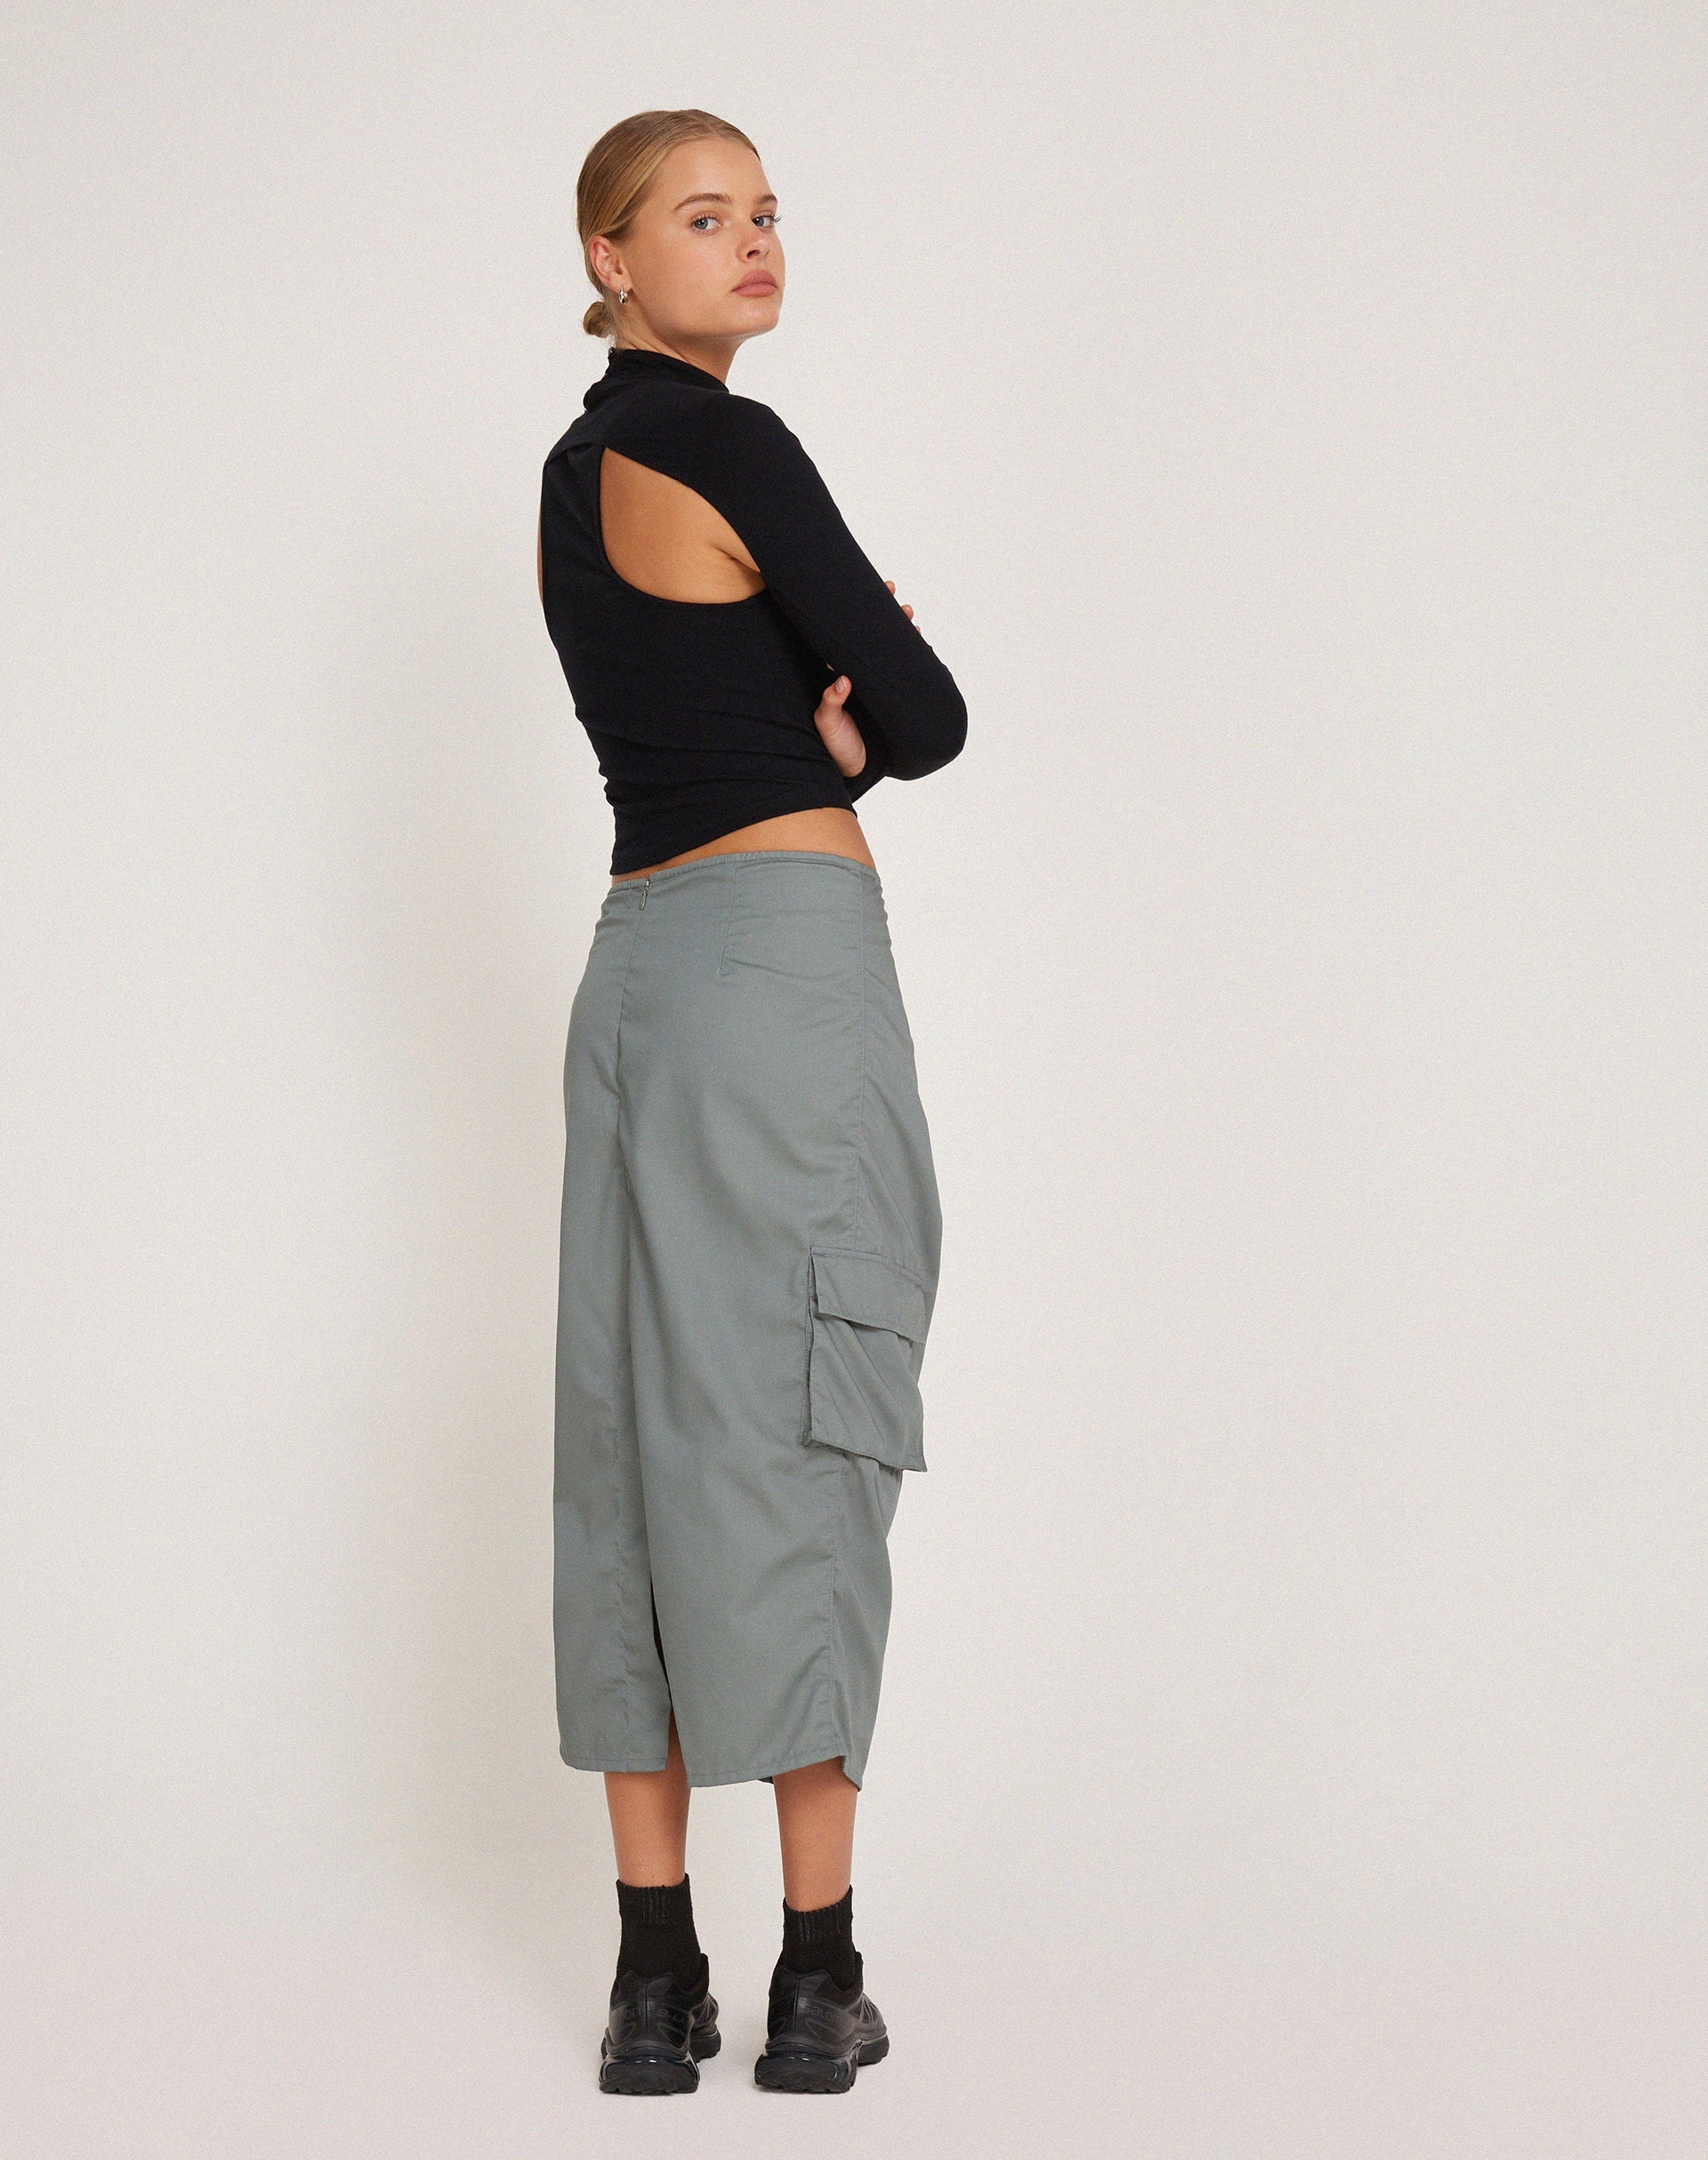 image of Enore Midi Skirt in Stone Blue